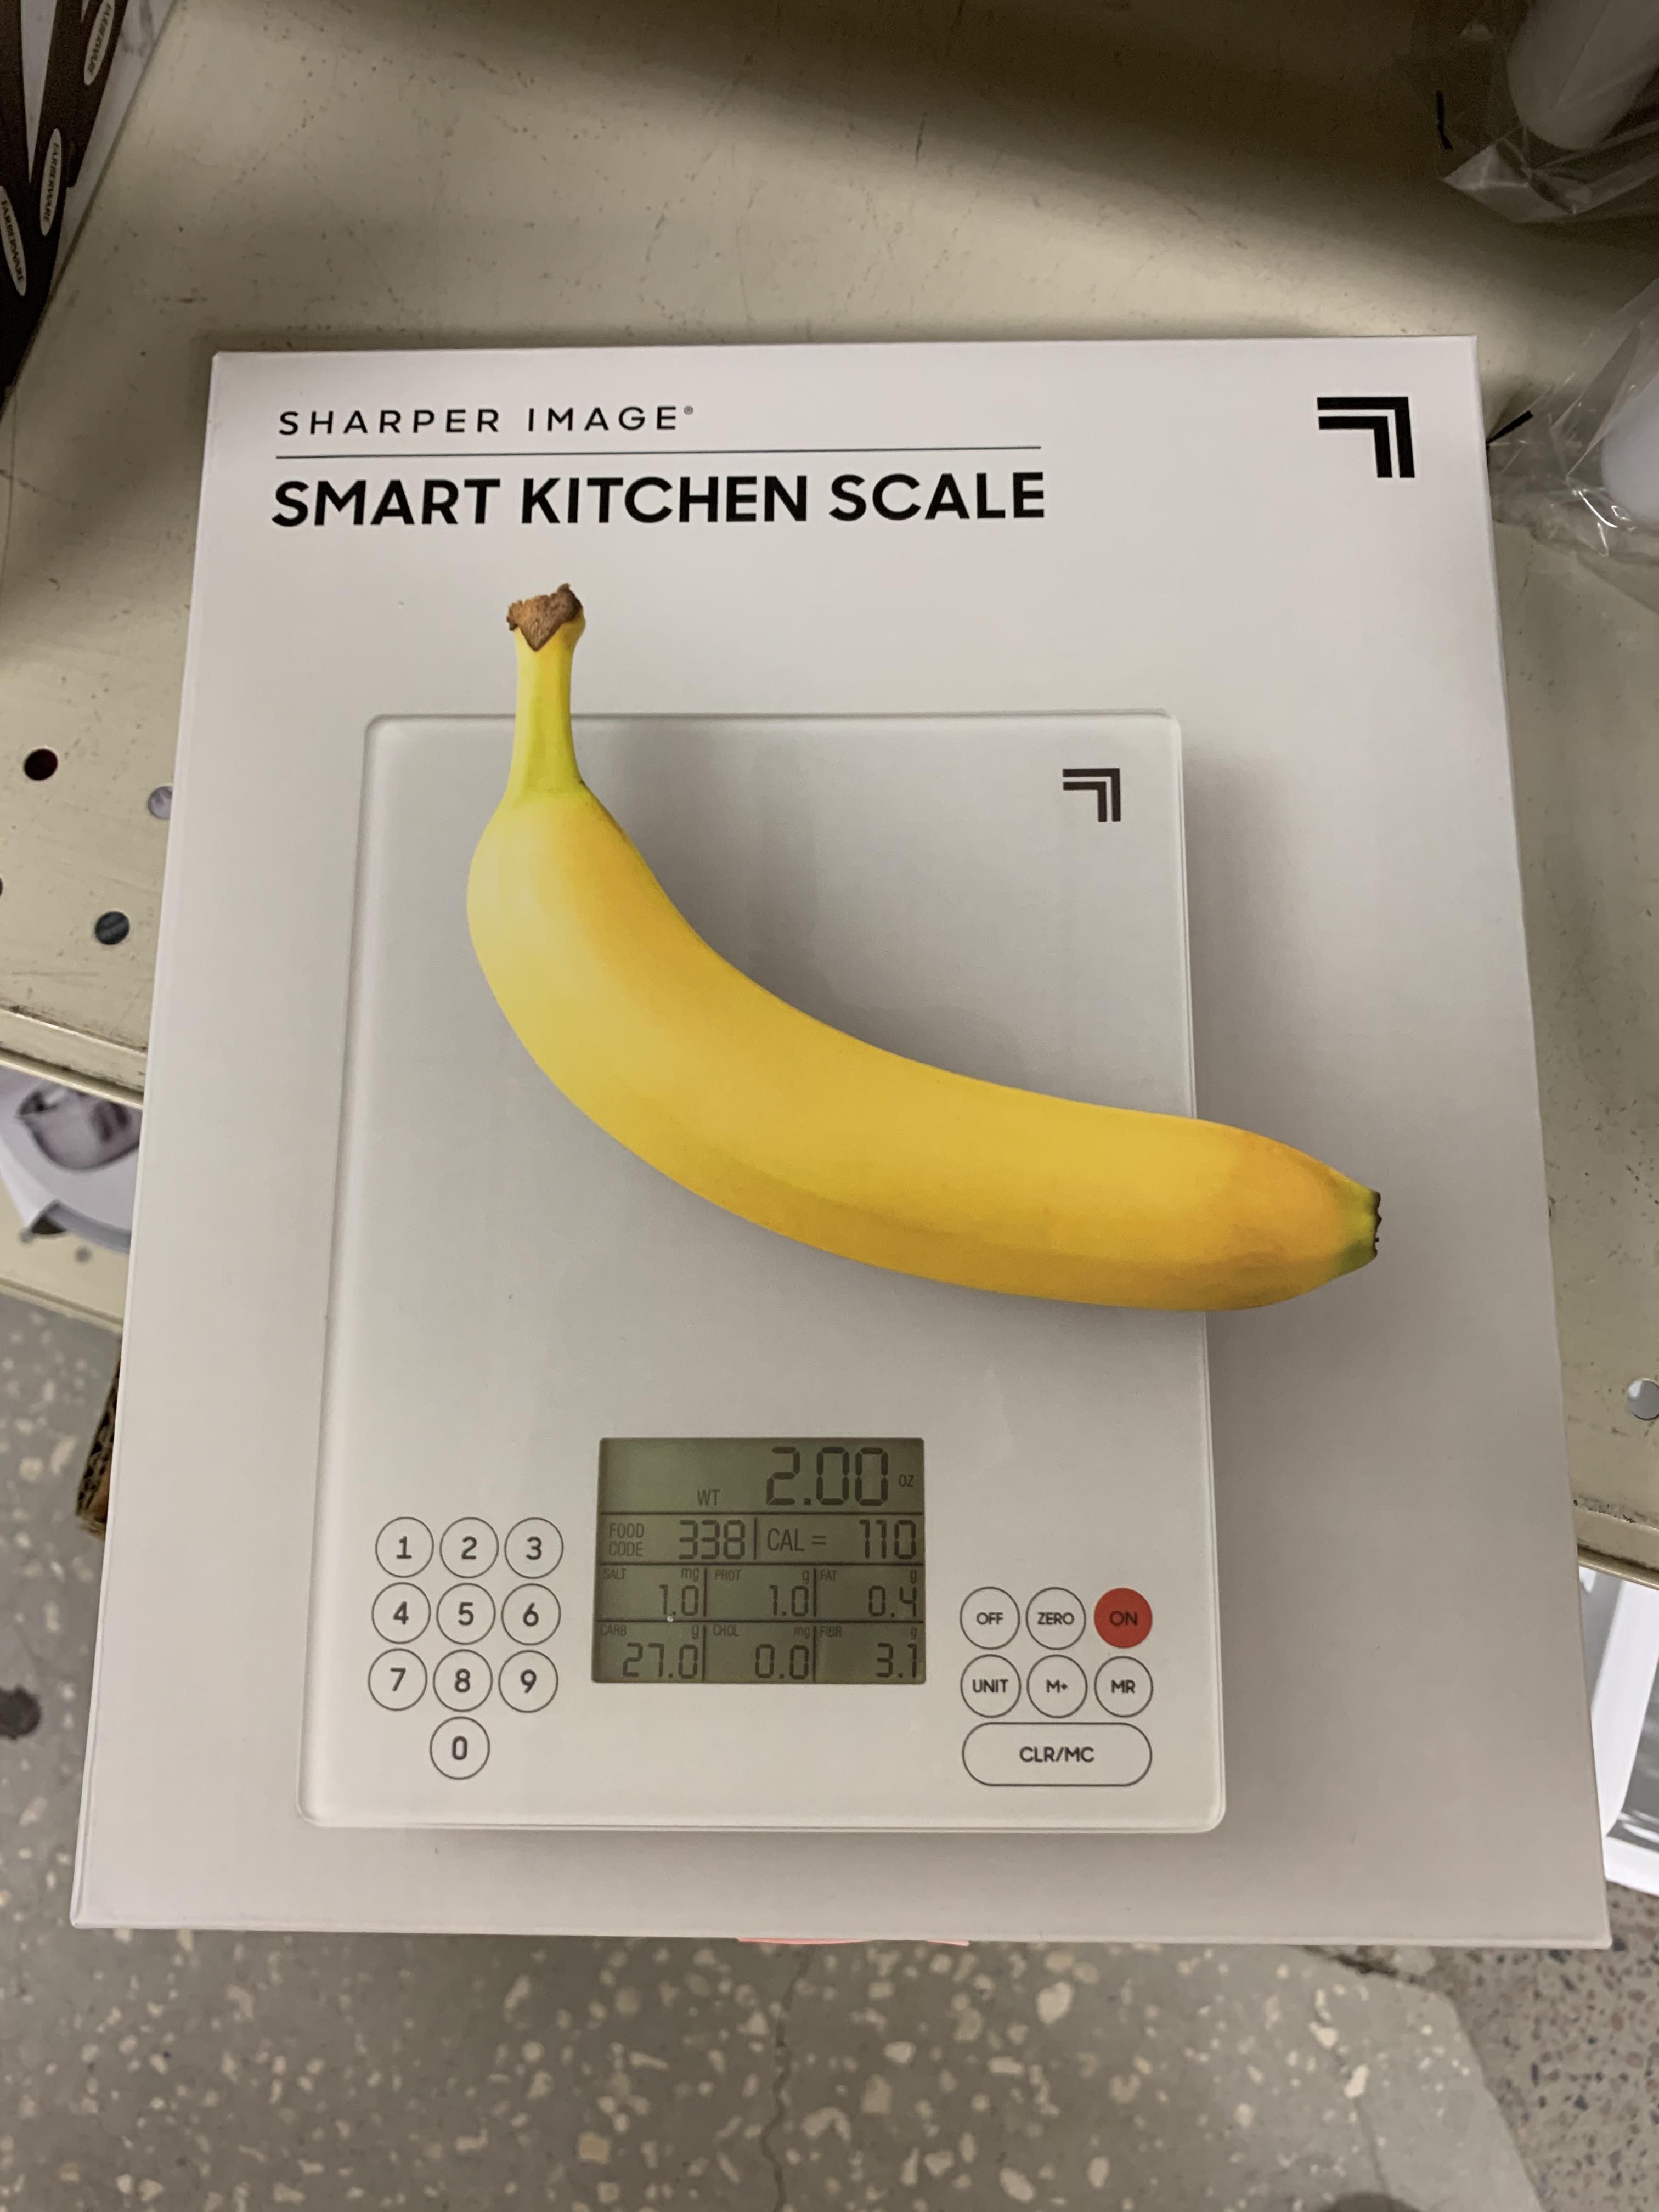 The box for this scale has a picture of a banana for scale.